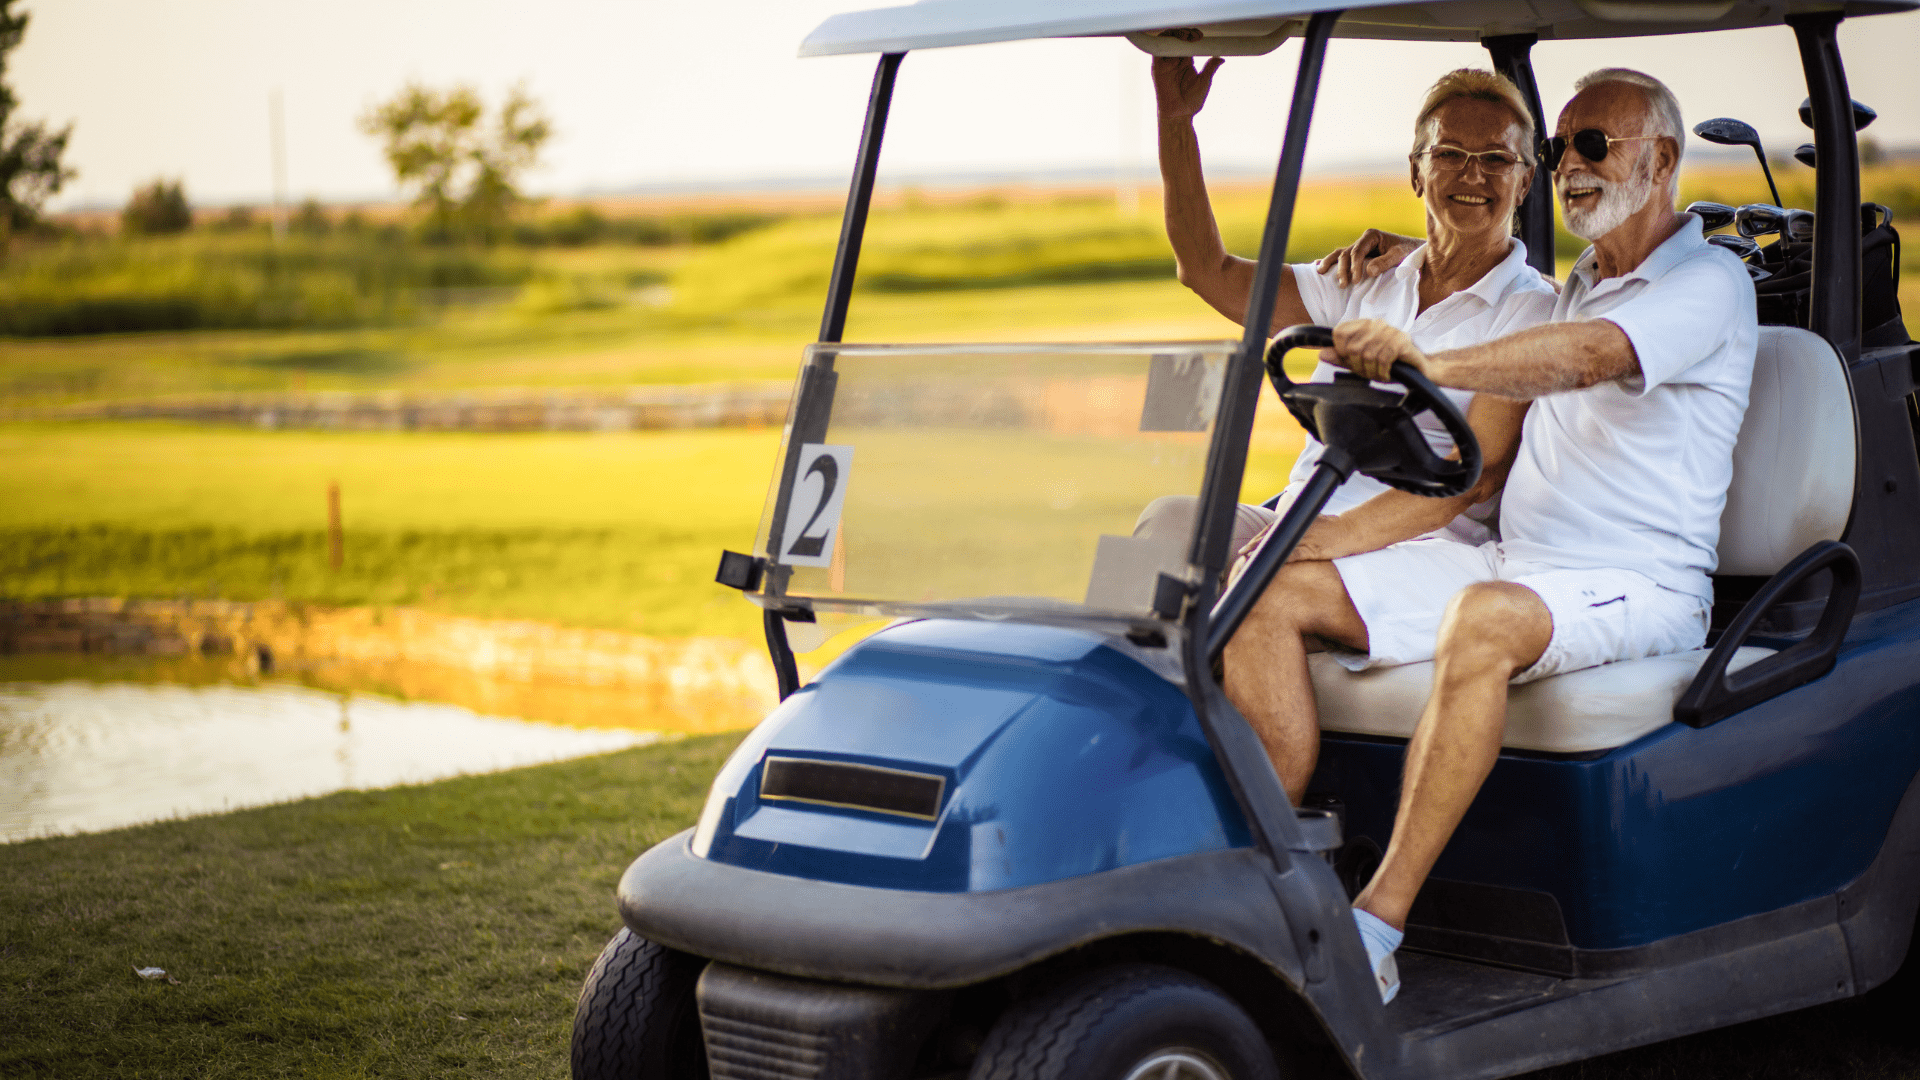 Pace of Play Golf with driver and passenger moving ahead to the next tee in their golf cart.